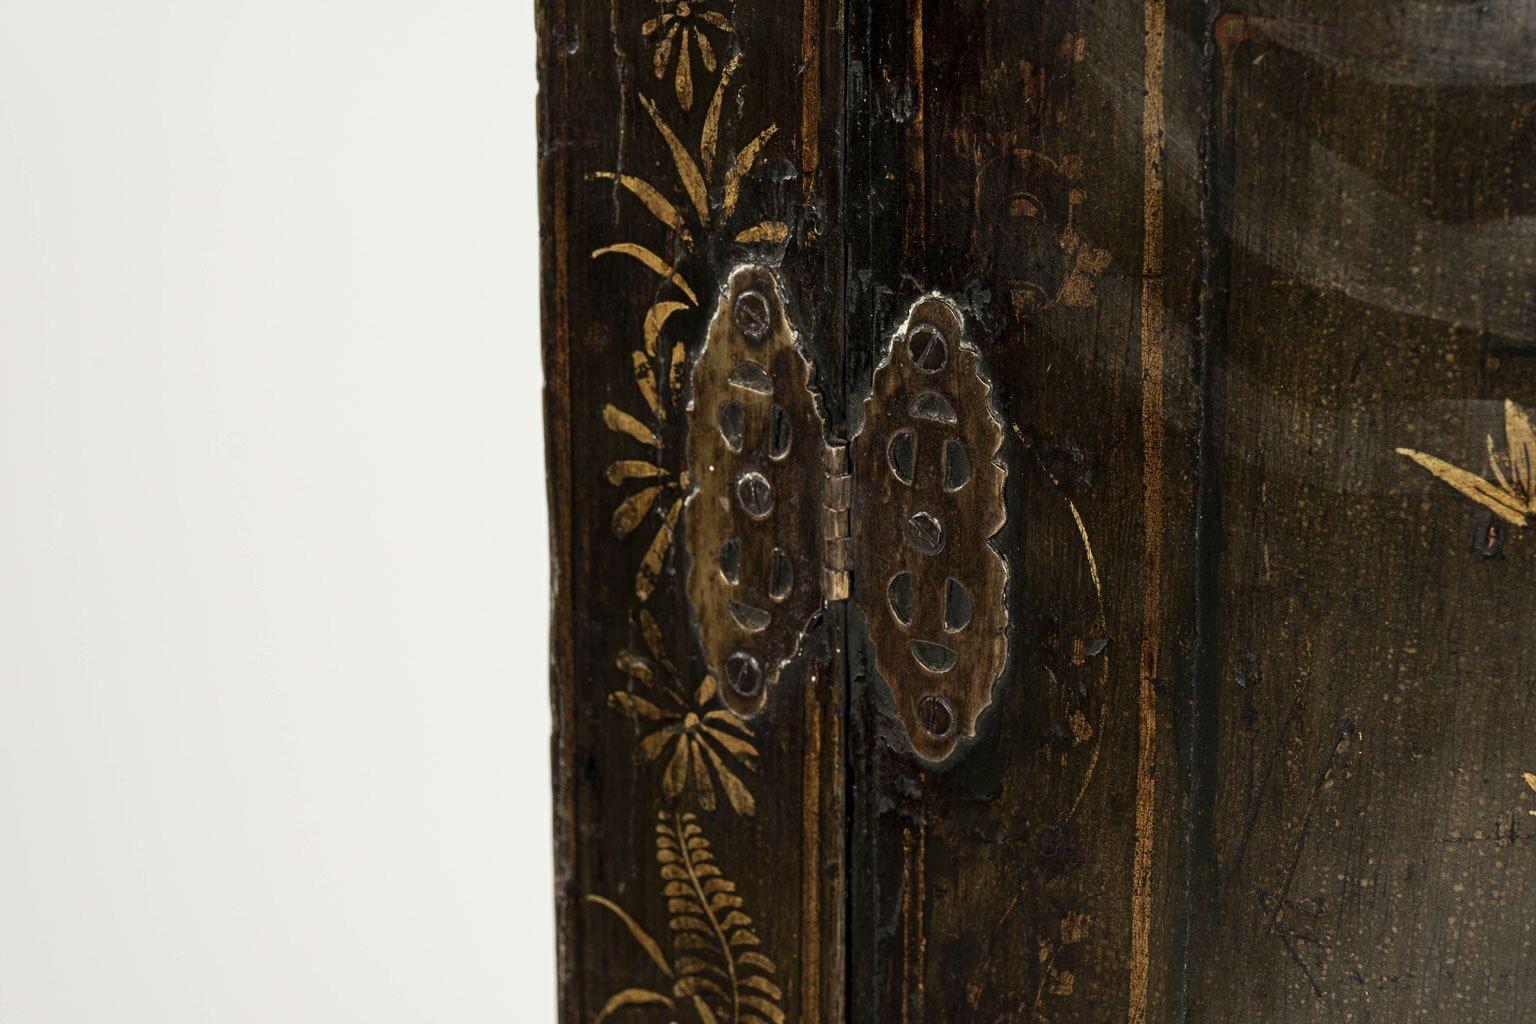 Olive green Chinoiserie George III hanging corner cupboard dating to the late 18th century. In excellent condition. Original dark, olive green painted finish embellished with painted and inlaid gold and brownish-oxblood red decoration. Original, or